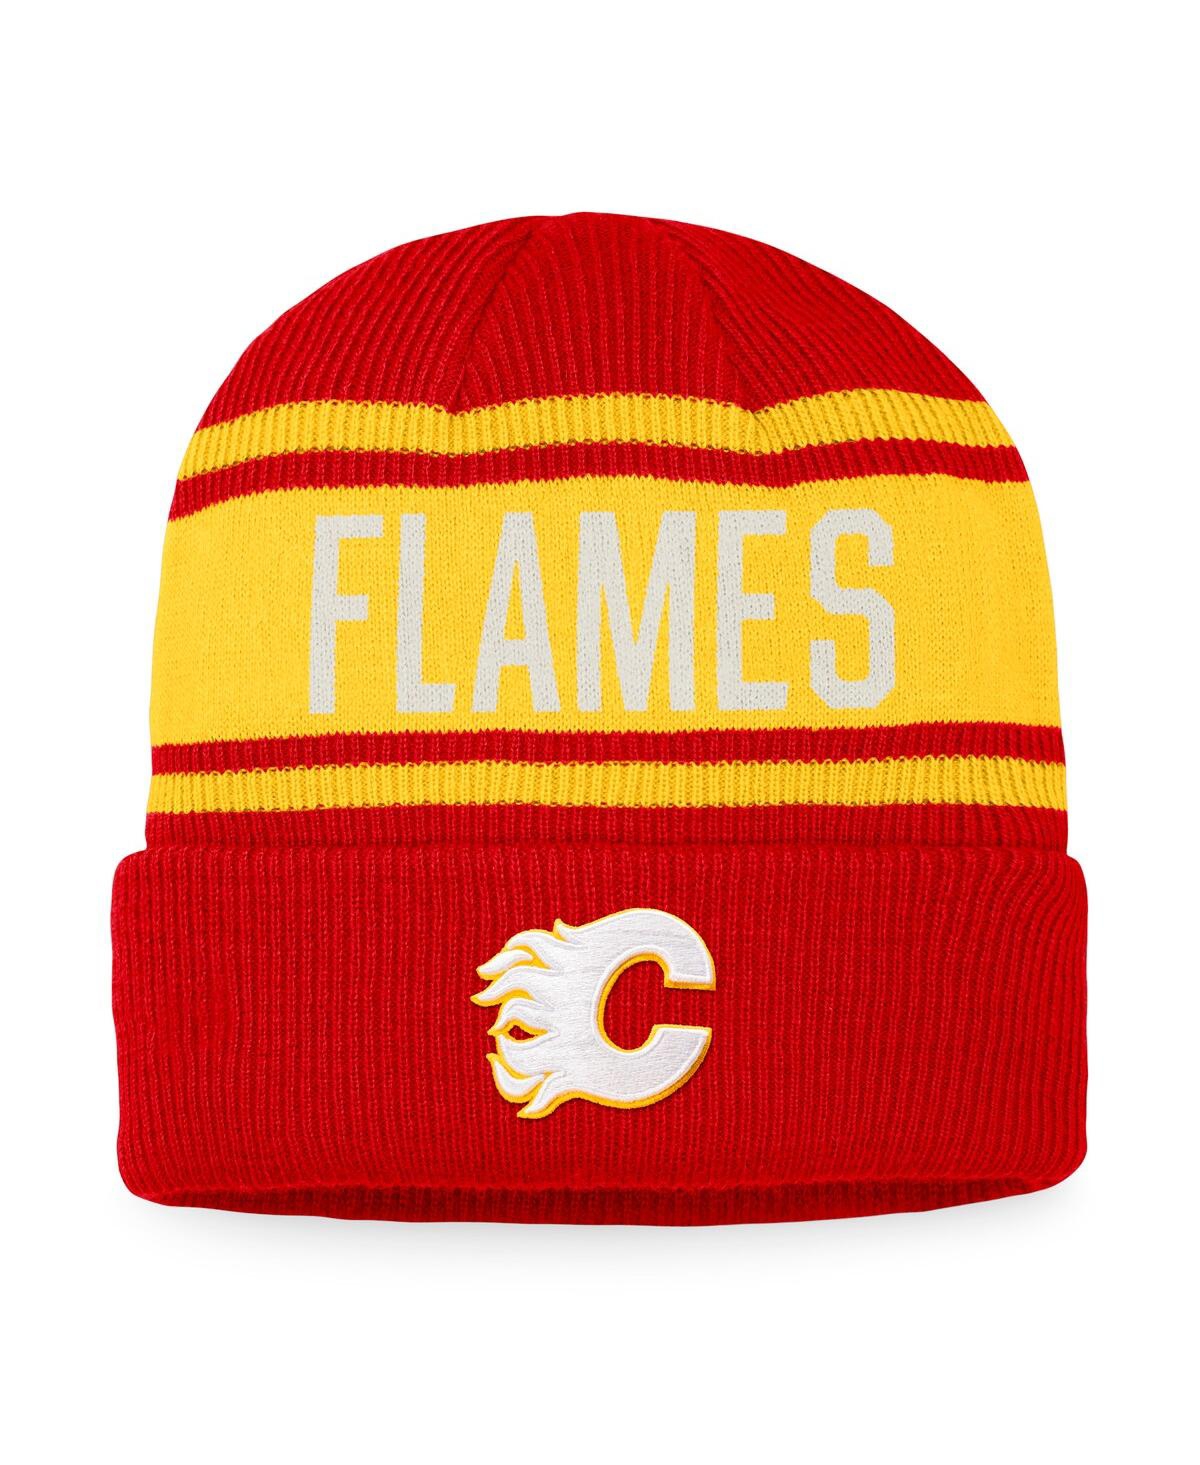 Fanatics Men's  Red And Gold Calgary Flames True Classic Retro Cuffed Knit Hat In Red,gold